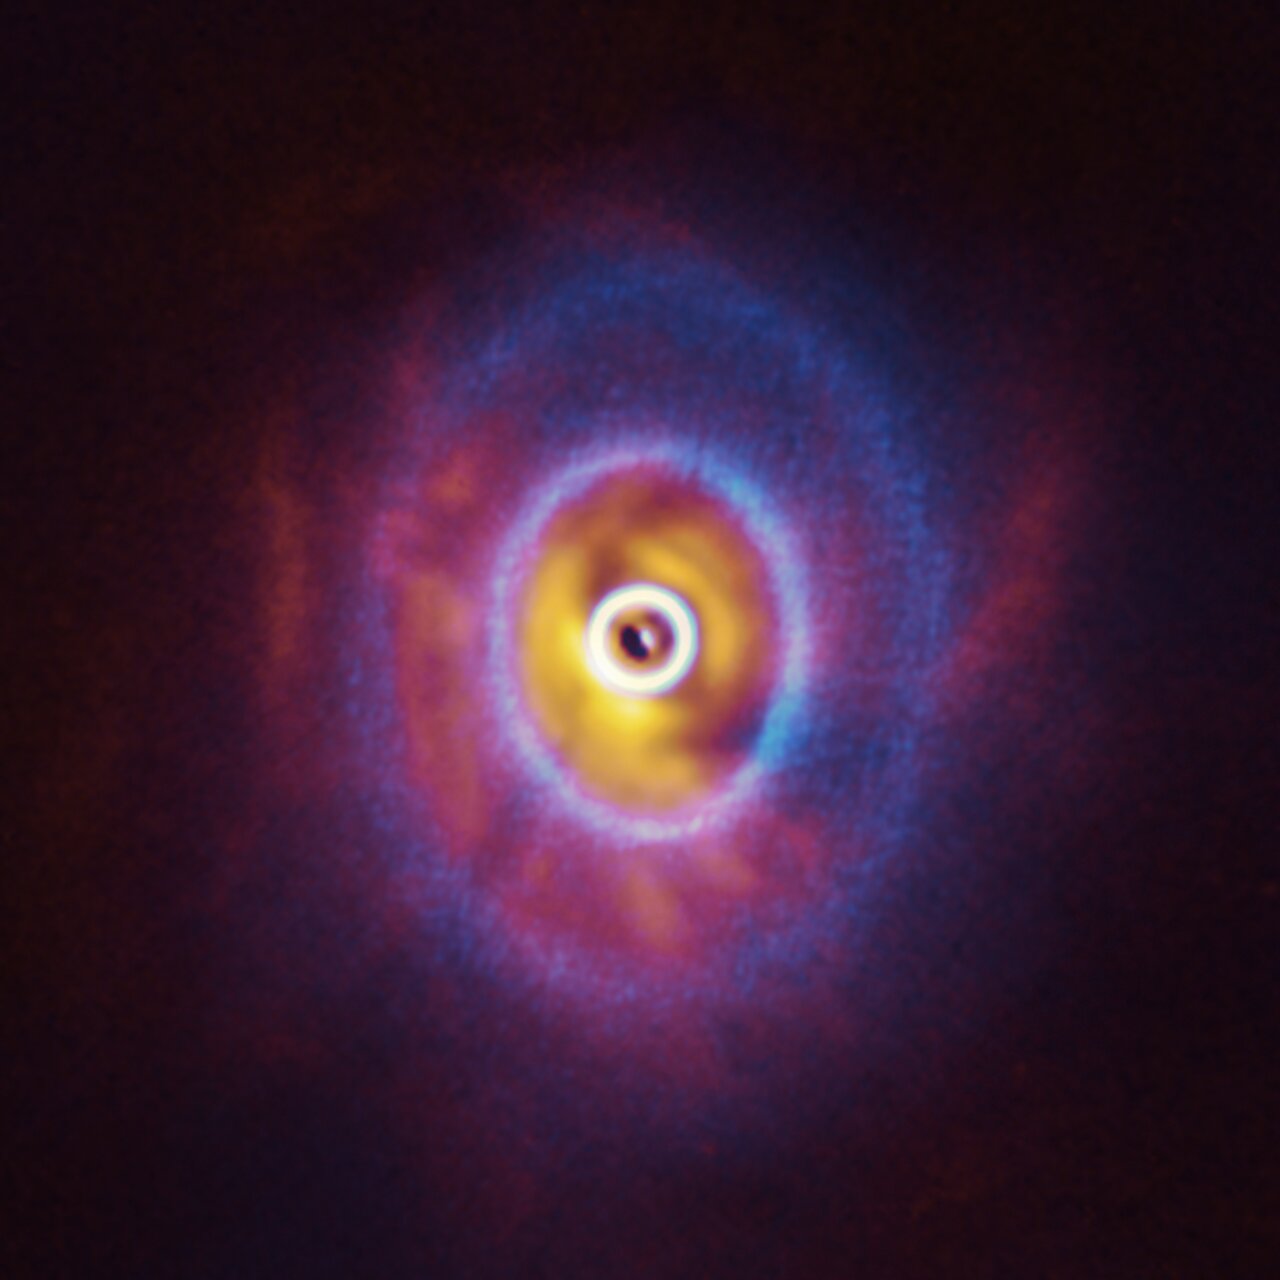 Blue rings superimposed over an orange and red blur. At the center, there is a bean-shaped gap.